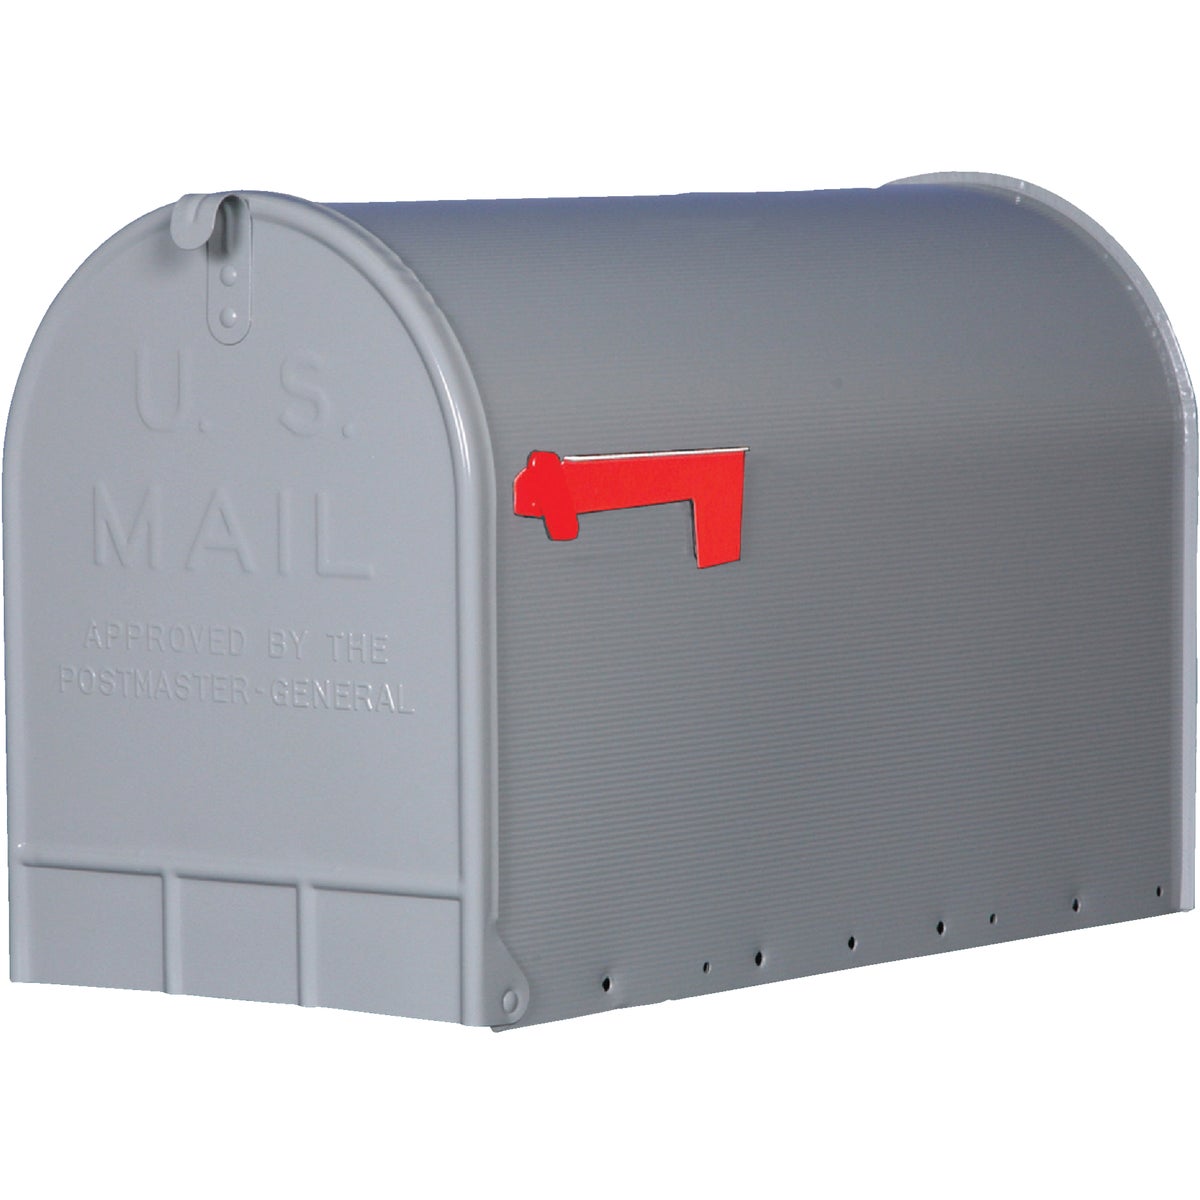 Item 206440, The Stanley mailbox has an extra-large capacity that enables it to receive 